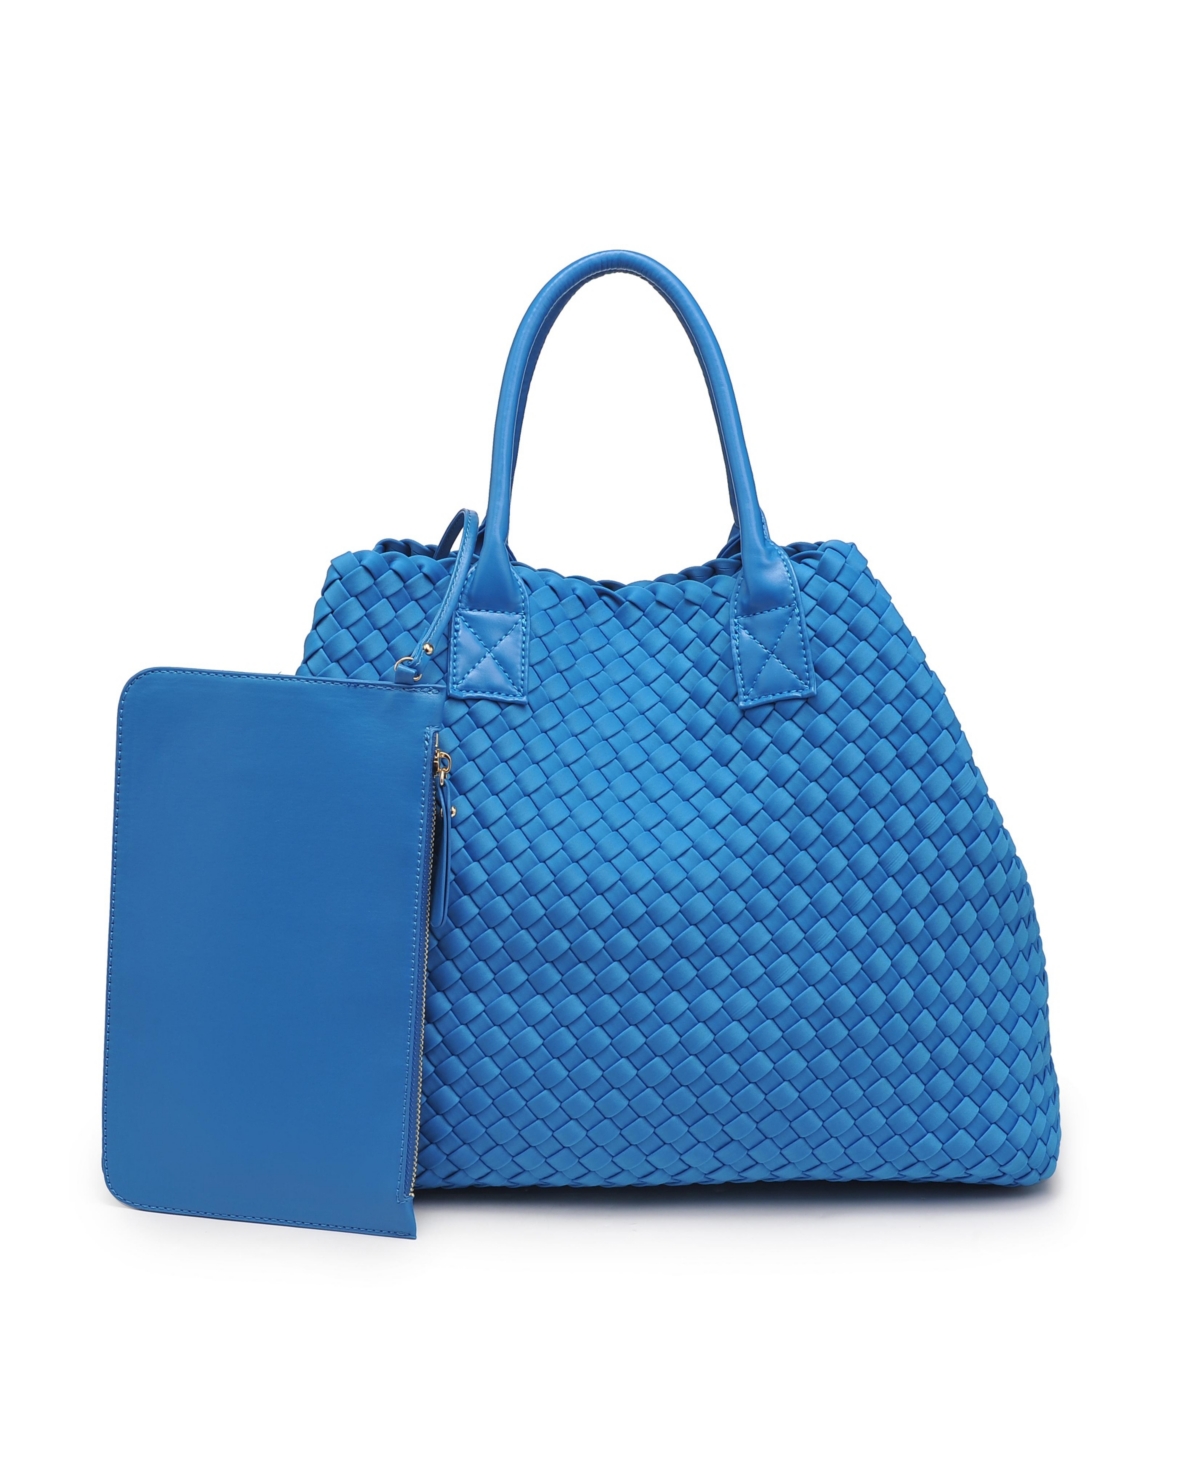 Urban Expressions Ithaca Woven Neoprene Tote In Ocean